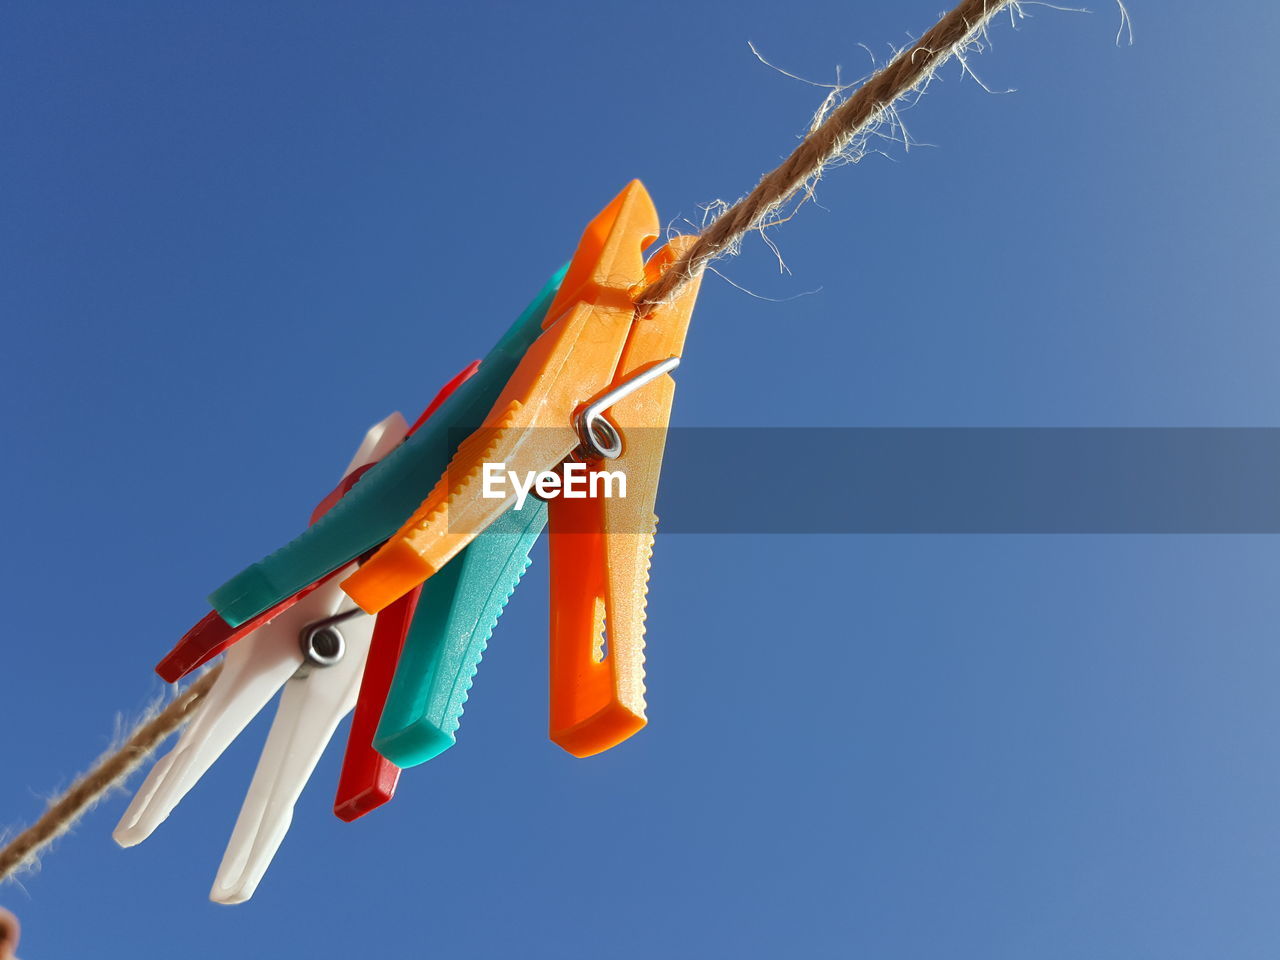 Low angle view of clothespins hanging against clear blue sky